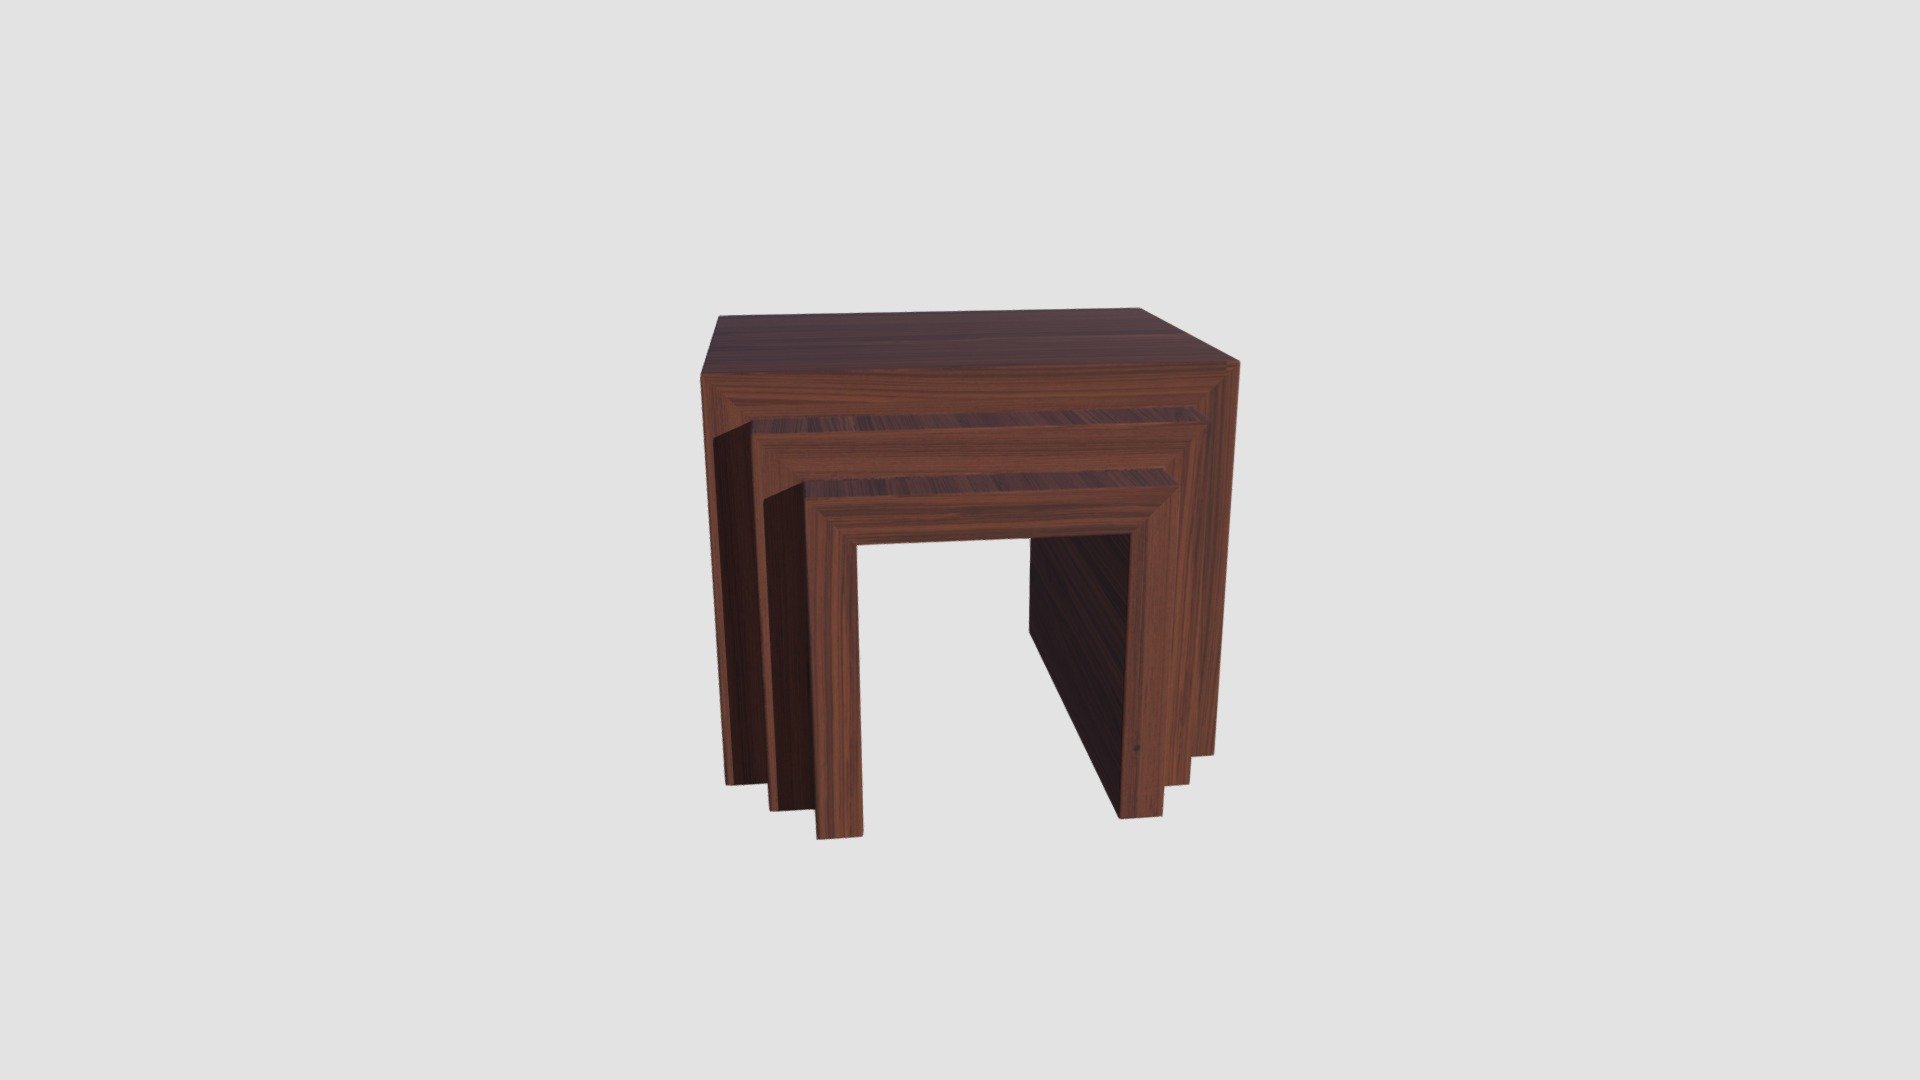 Highly detailed 3d model of table with all textures, shaders and materials. It is ready to use, just put it into your scene 3d model